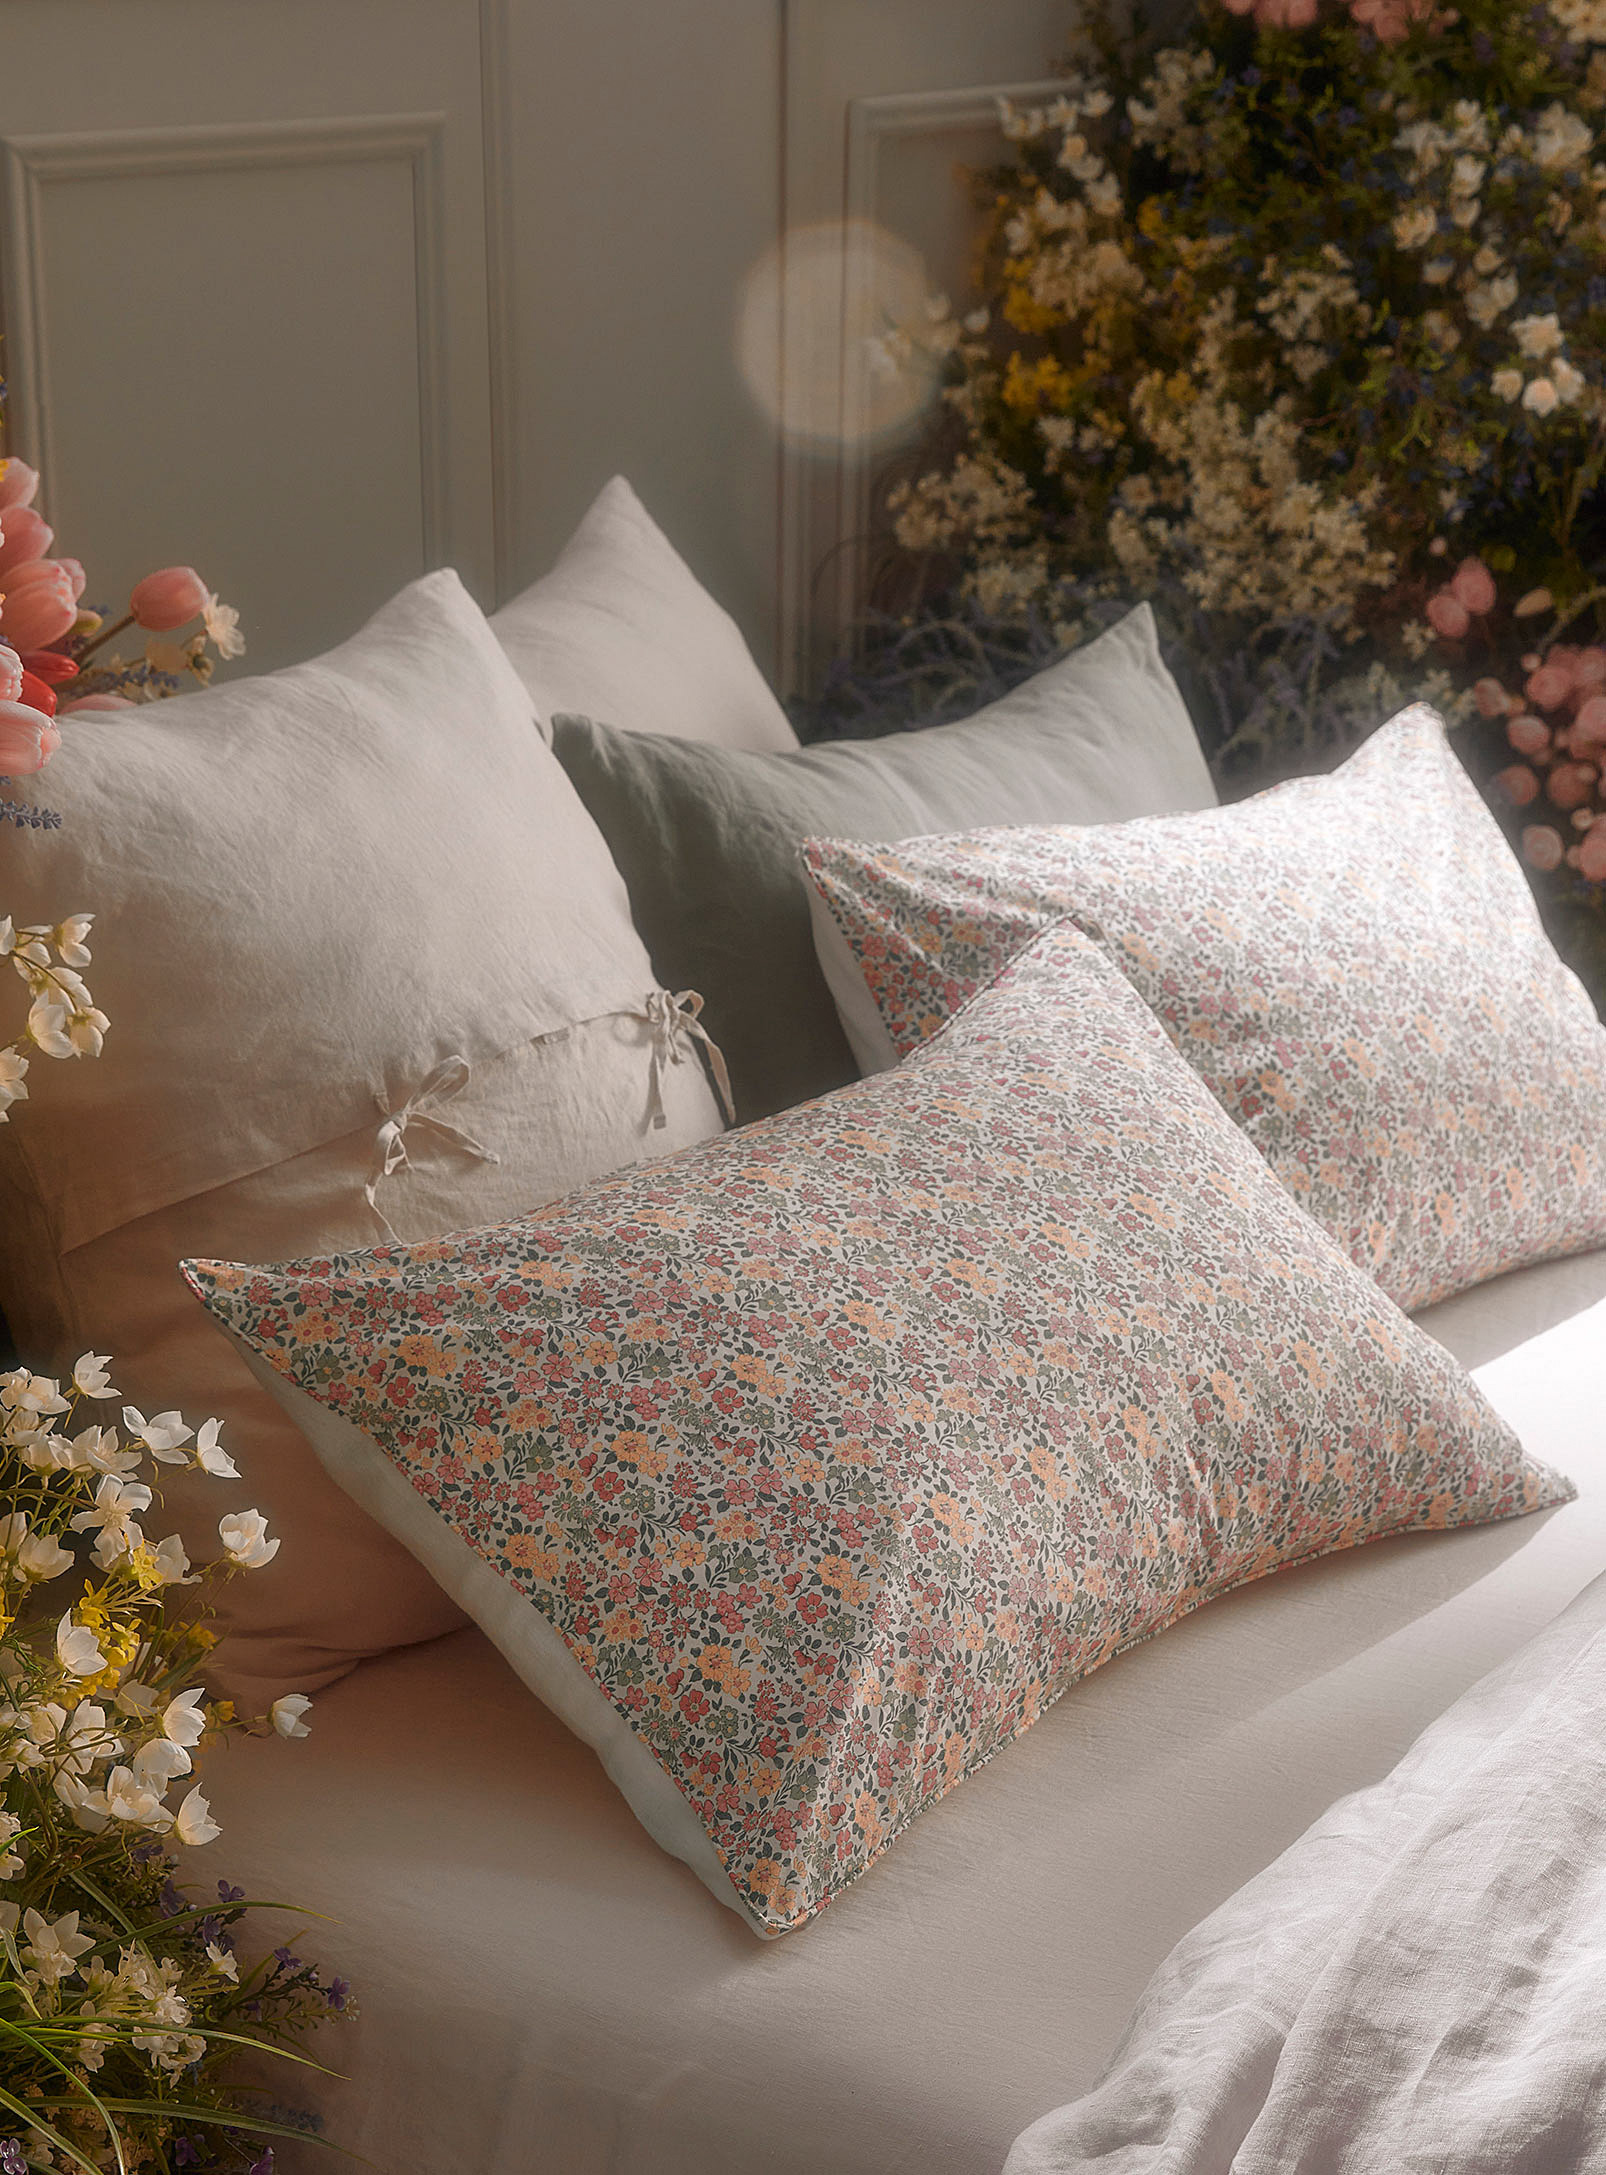 Simons Maison Annabella Floral Pillow Sham Made With Liberty Fabric In Assorted